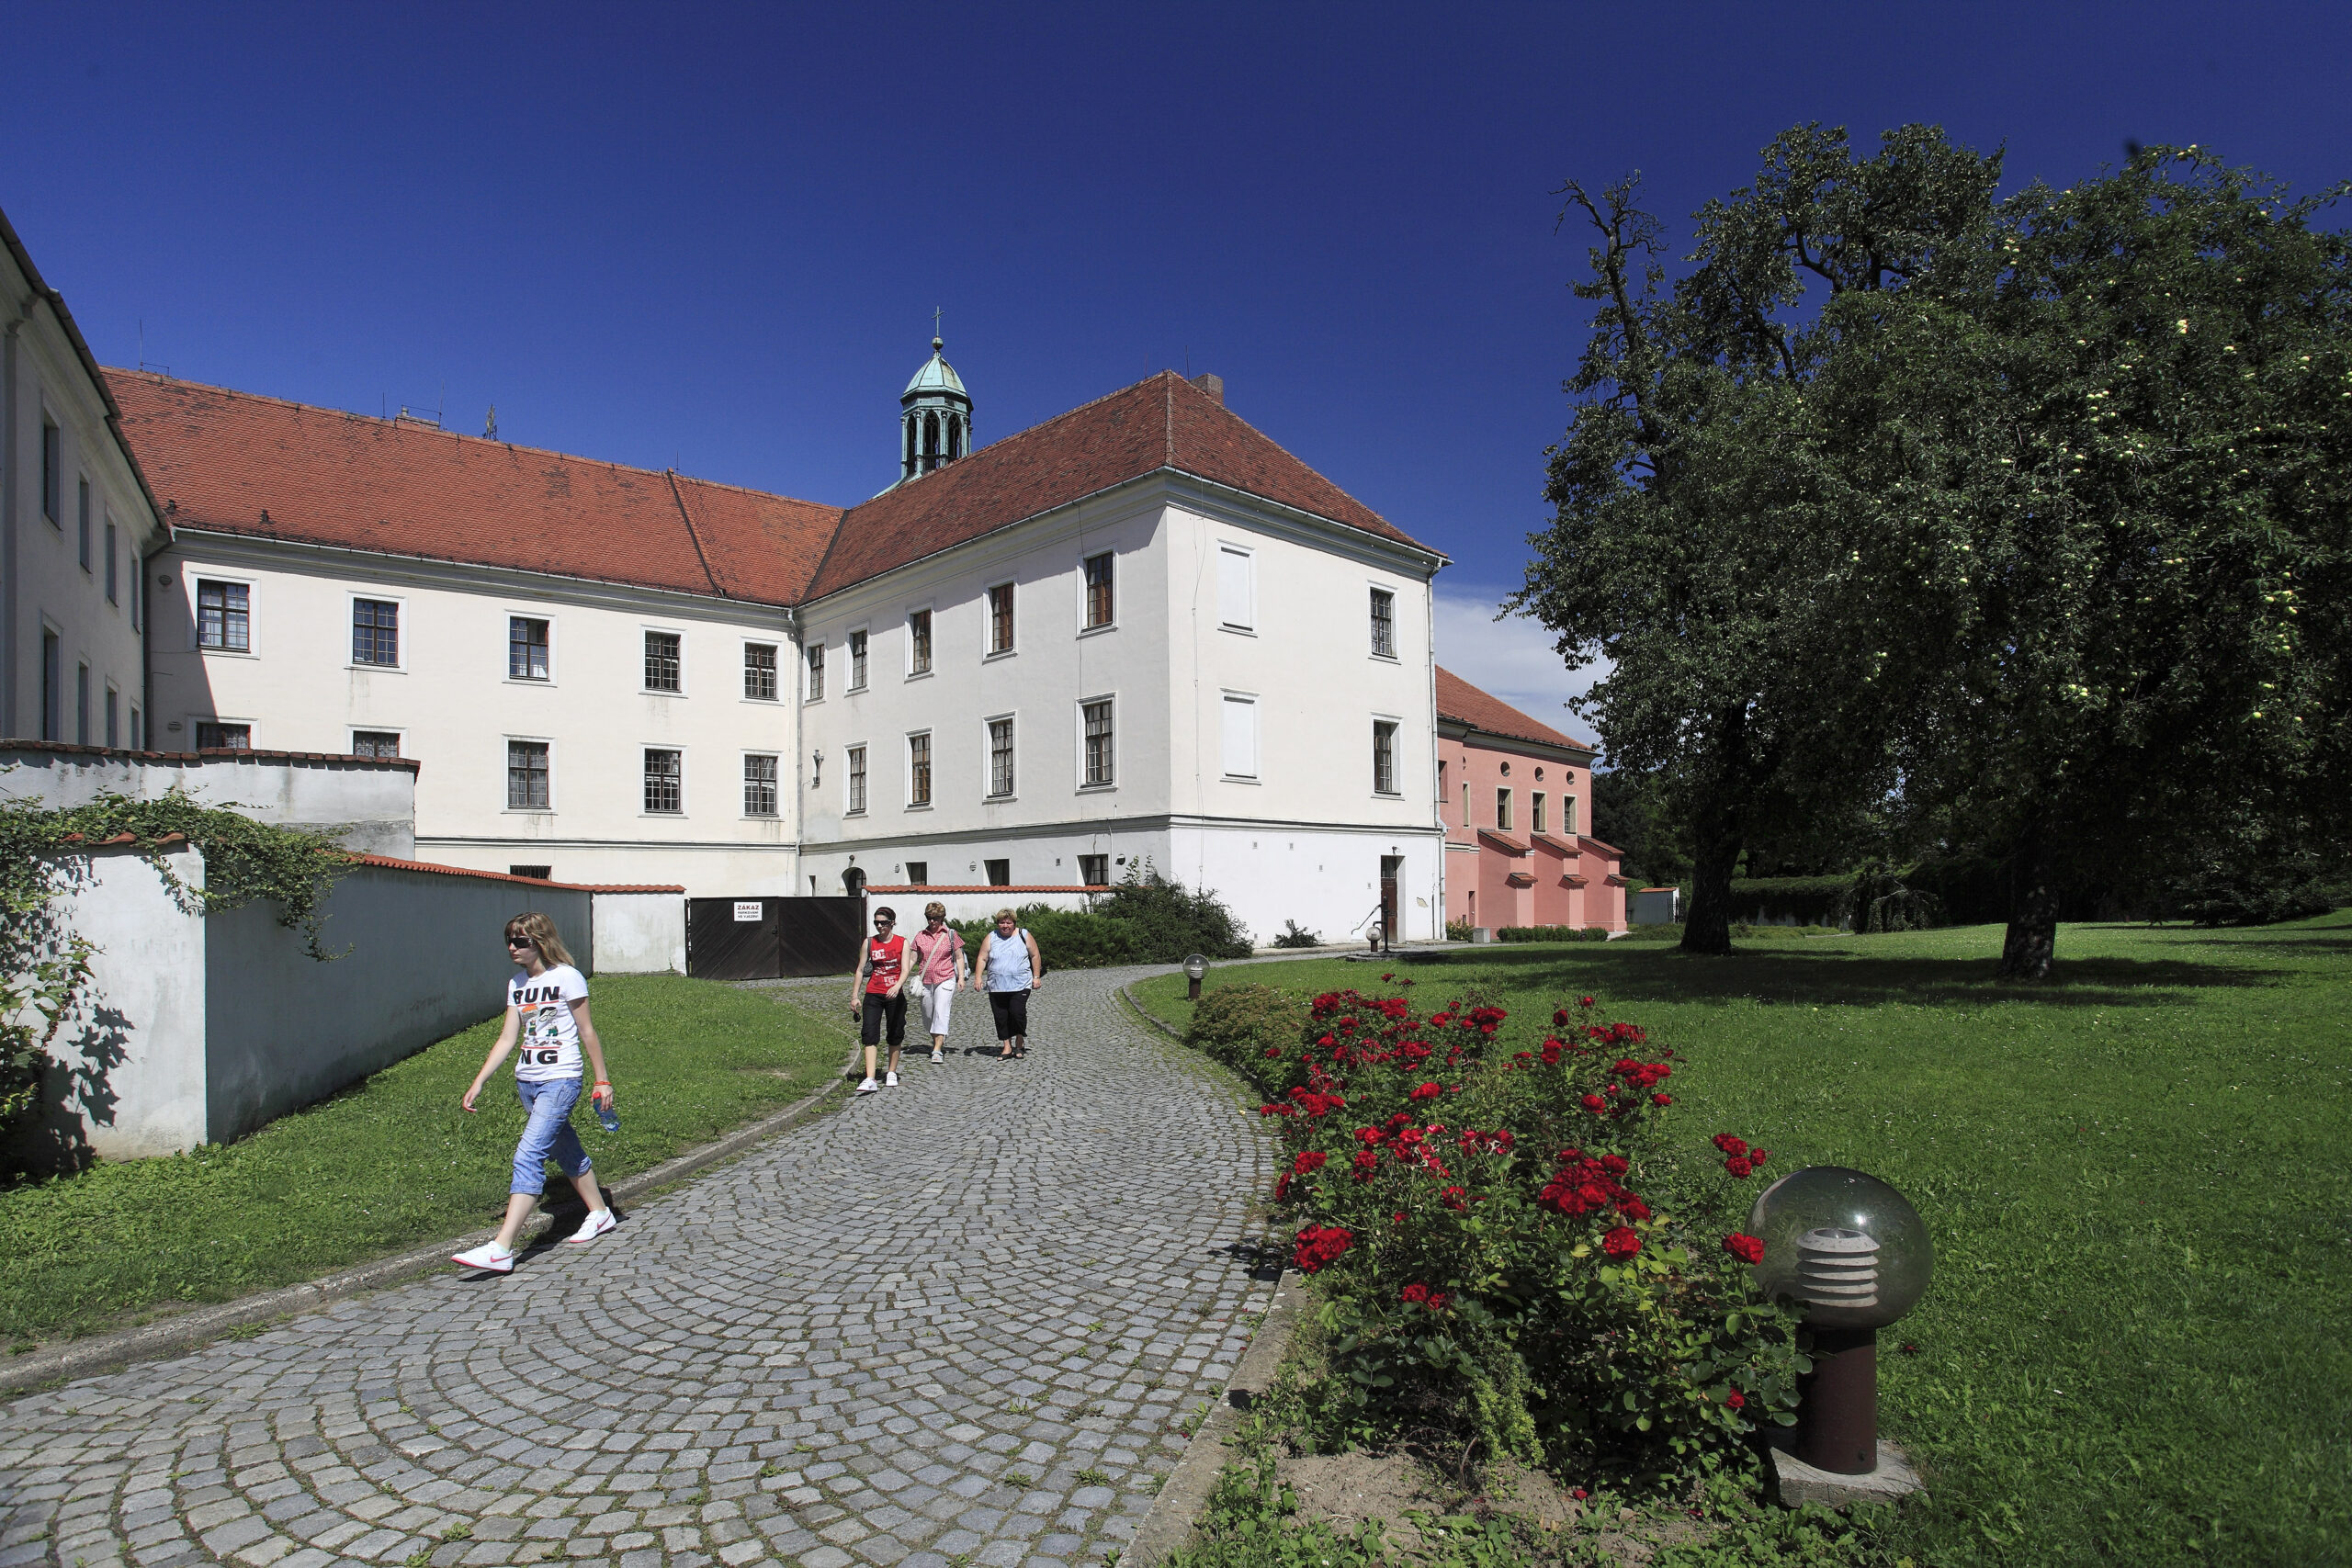 A guided tour of the Dominican monastery and Saint Wenceslaus Church